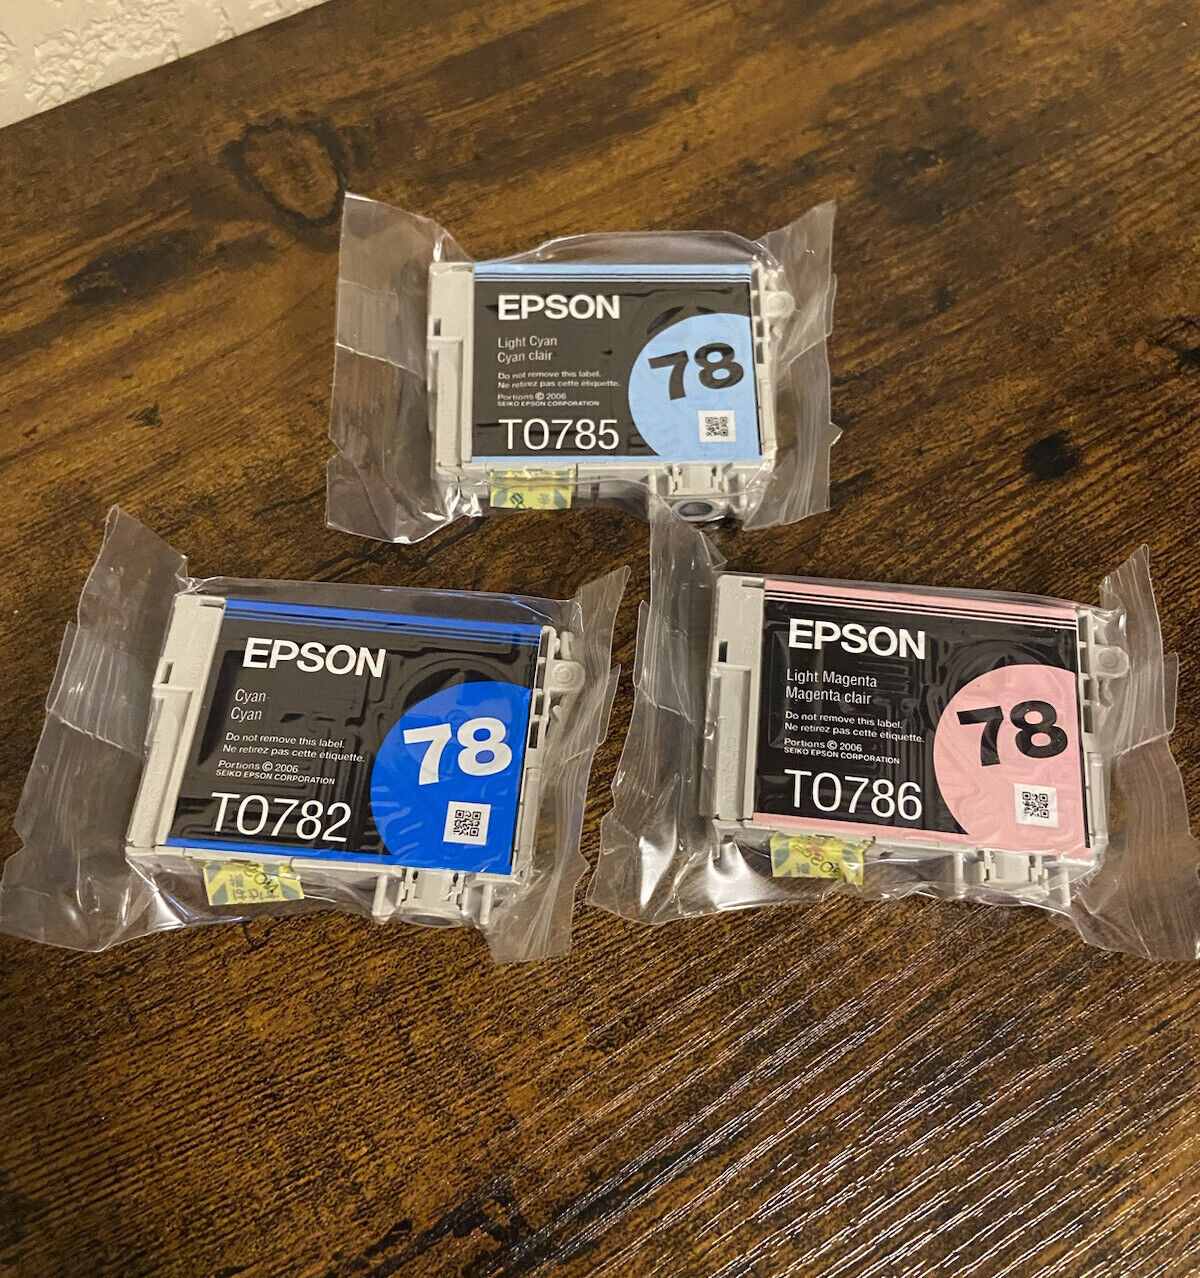 3 NEW SEALED Epson 78 Cyan Lgt Cyan Lgt Magenta Ink Cartridges Made in 2006